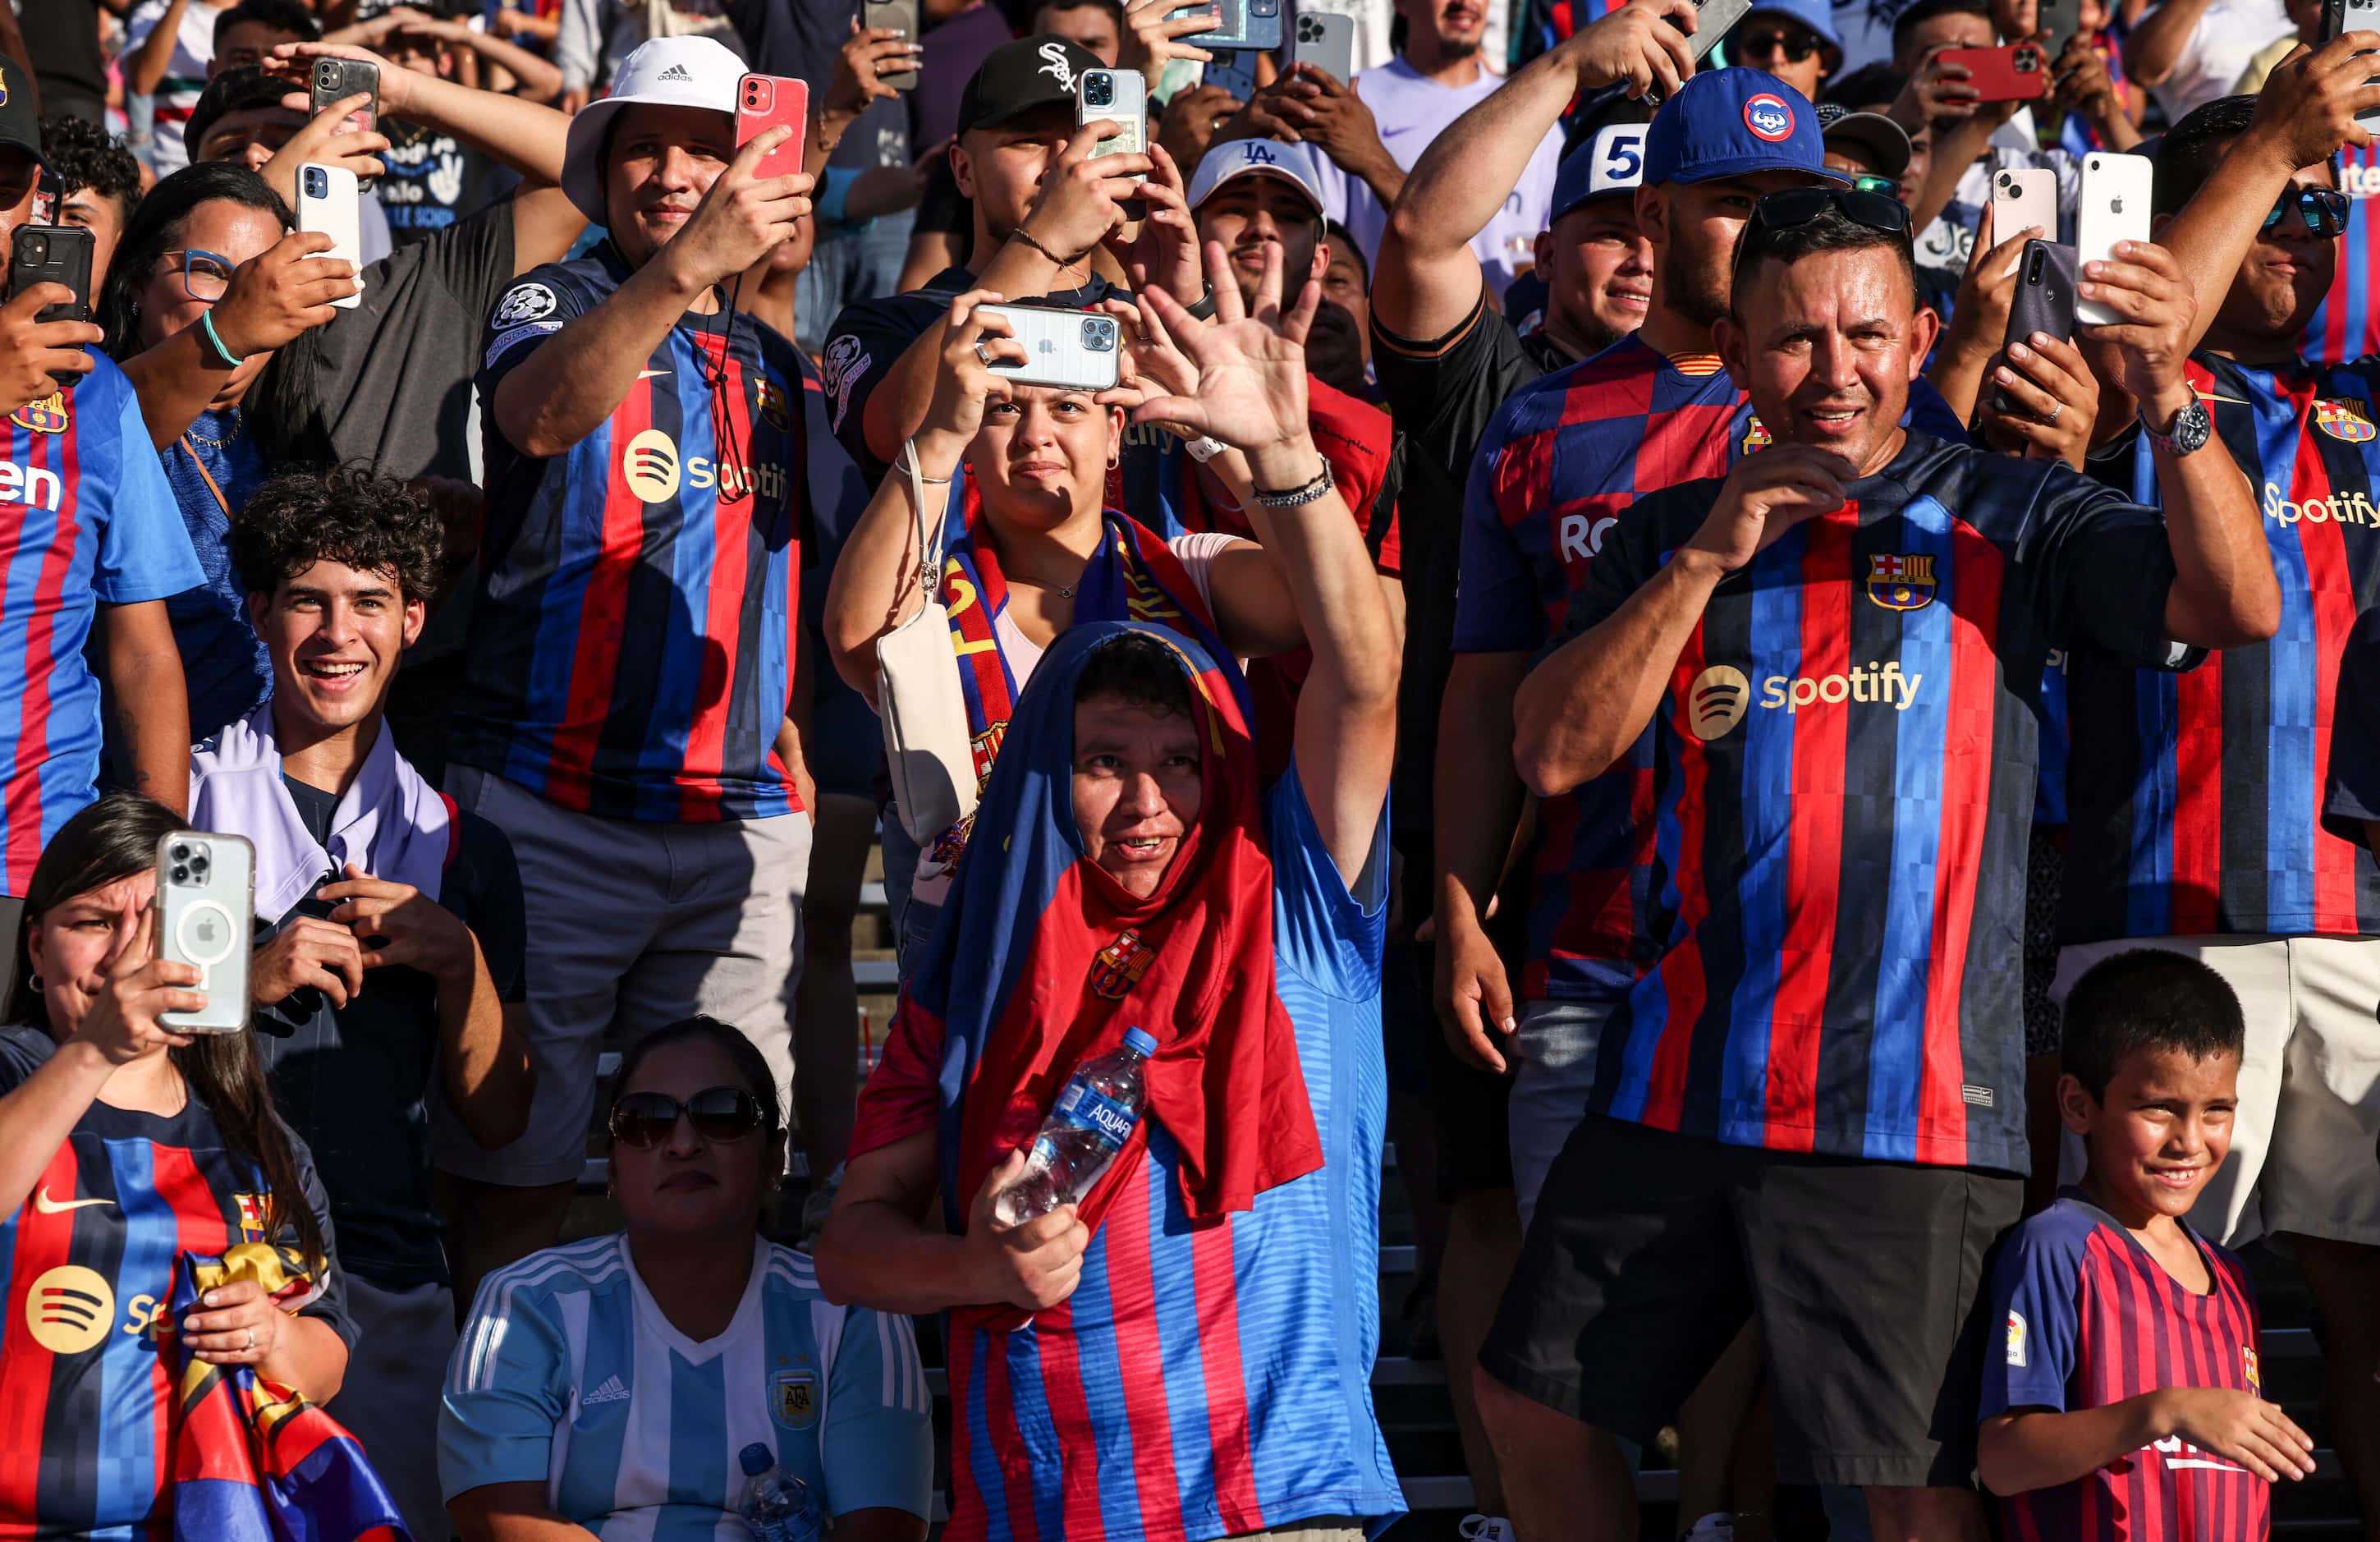 Barcelona fans cheer as team members walk past them, Tuesday, July 26, 2022 at Cotton Bowl...